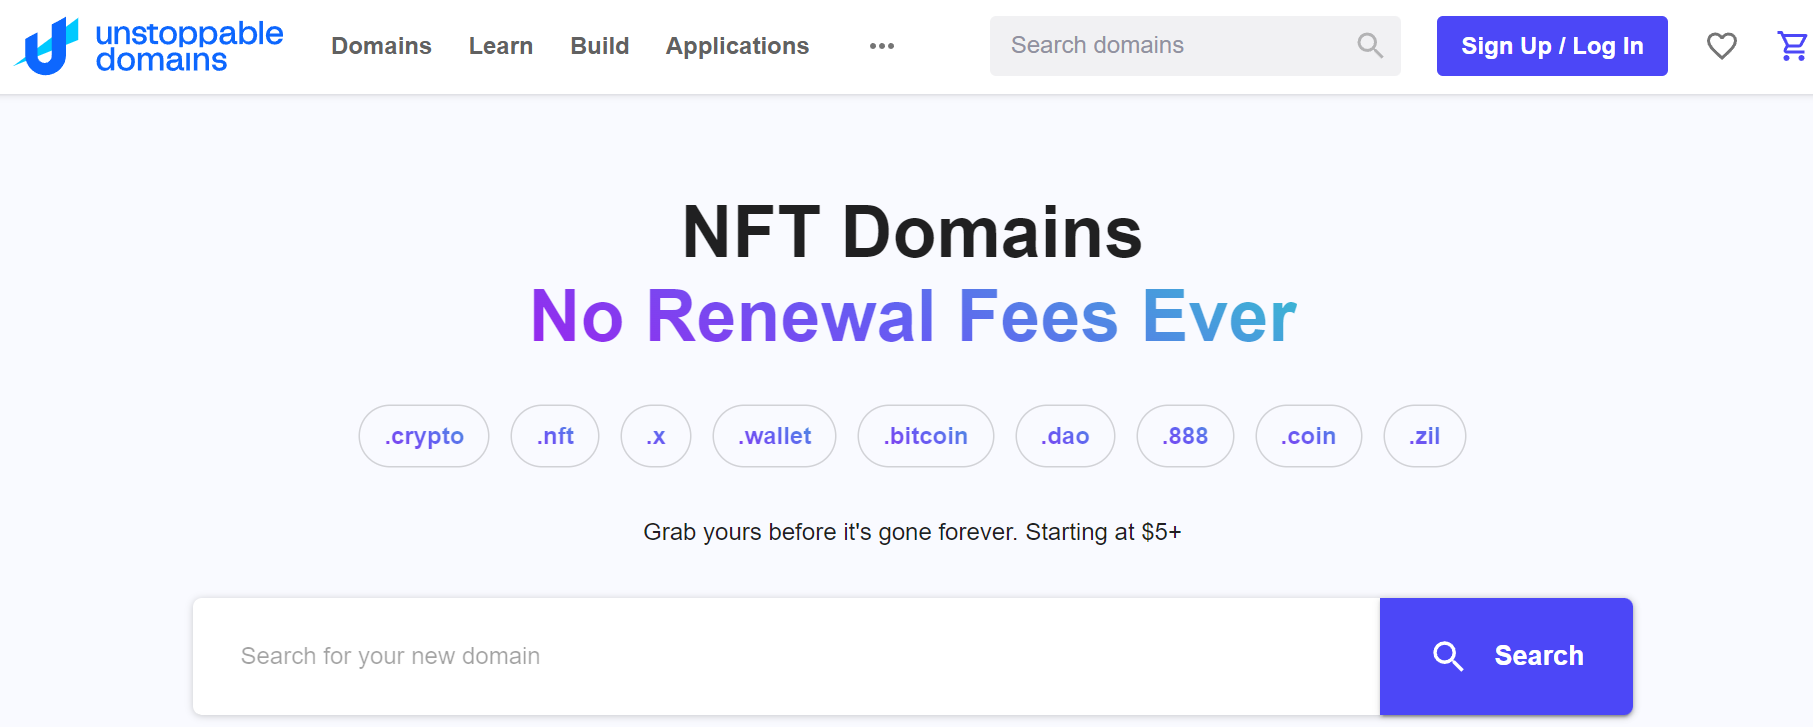 what-are-nft-domains-are-they-indexed-by-google-3 什么是 NFT 域？  （&它们被谷歌索引了吗？）